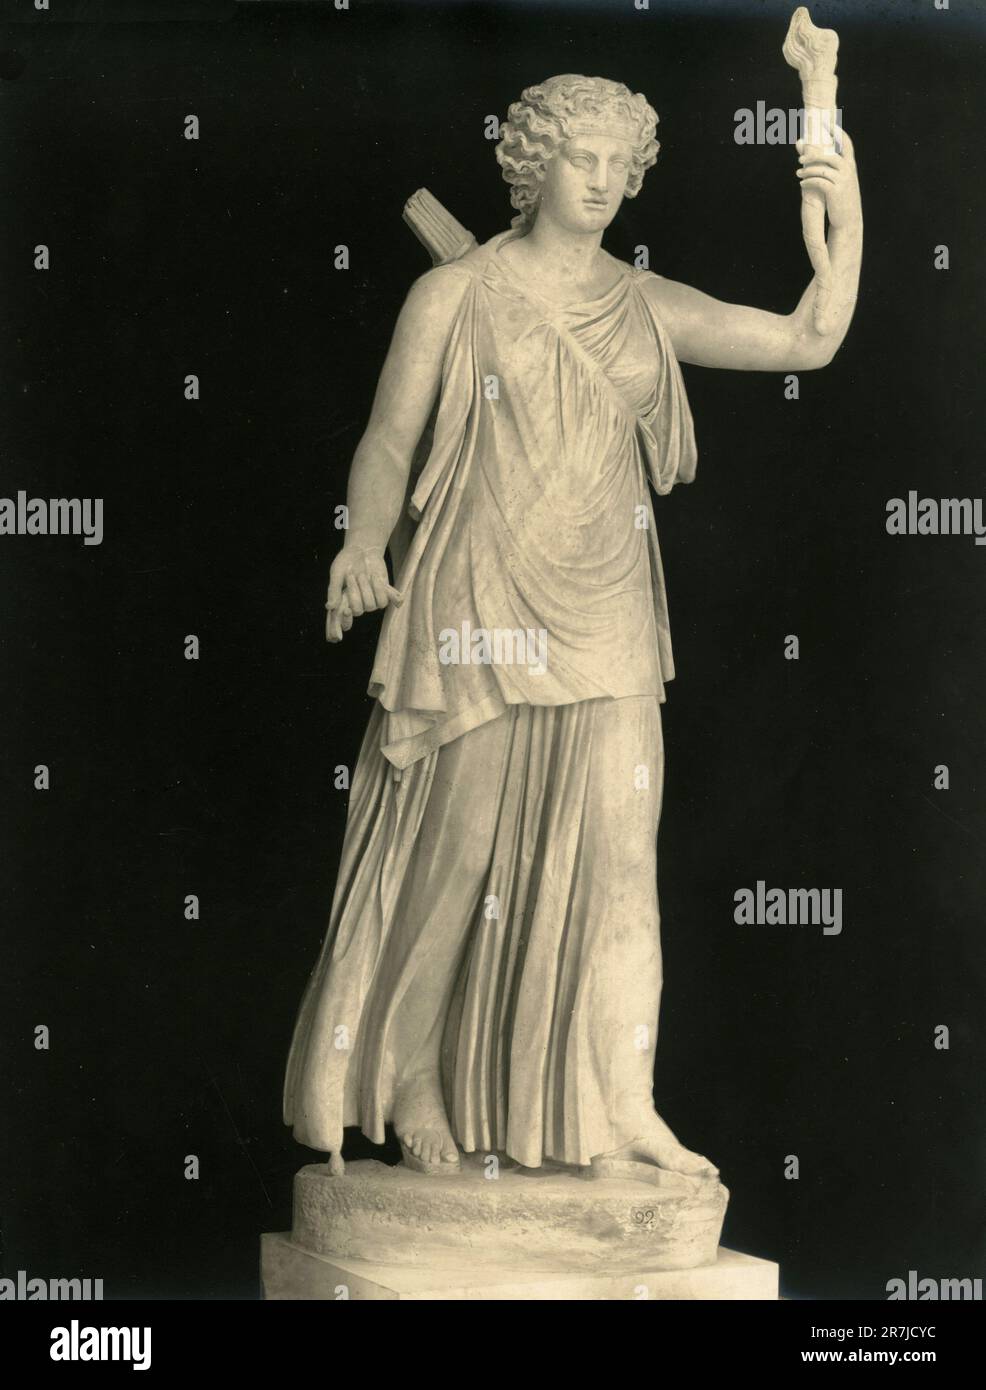 Ancient marble statue of Roman goddess Artemis, or Diana Lucifera, Vatican Museum, Rome, Italy 1900s Stock Photo